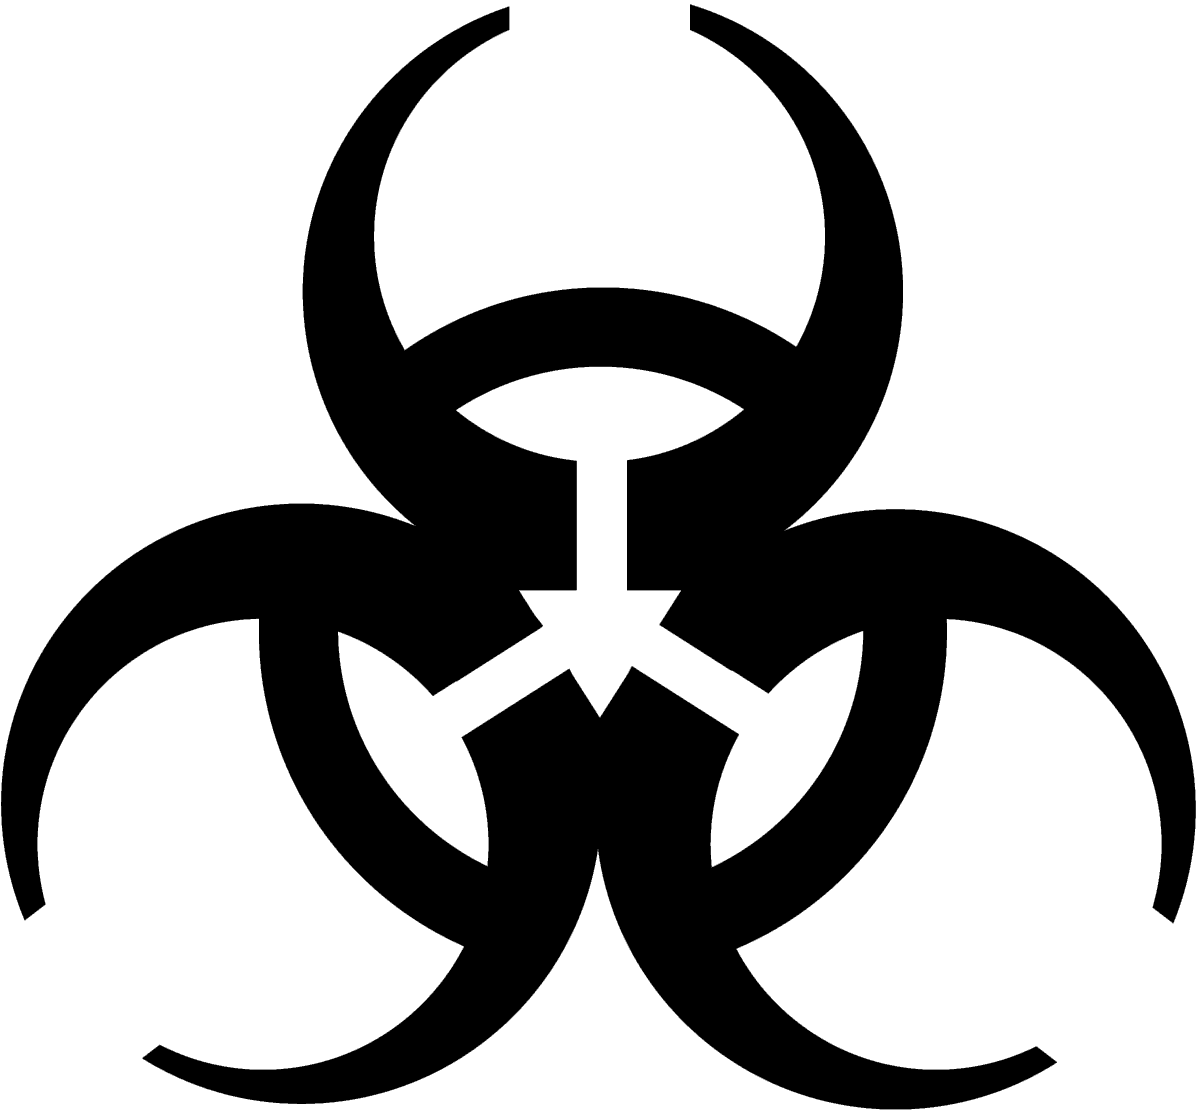 Biohazard Symbol Silhouette Background PNG Image